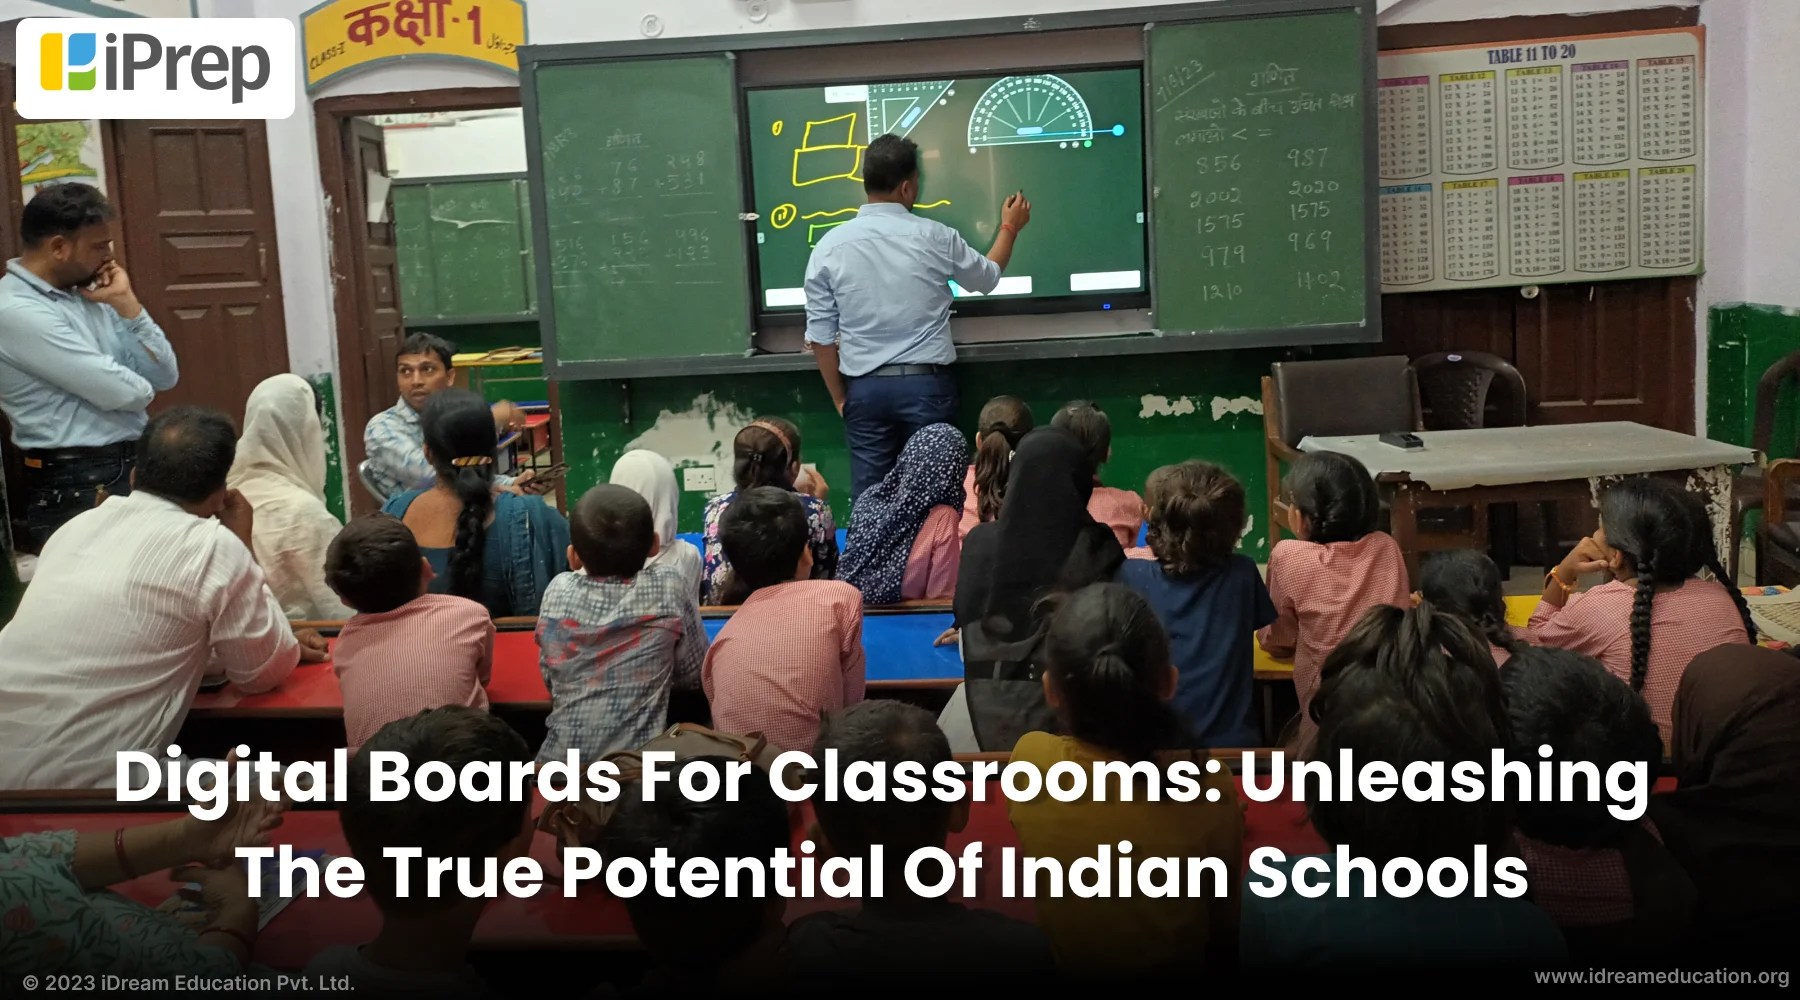 A visual of digital boards for classrooms being used to deliver teaching instruction in Indian schools